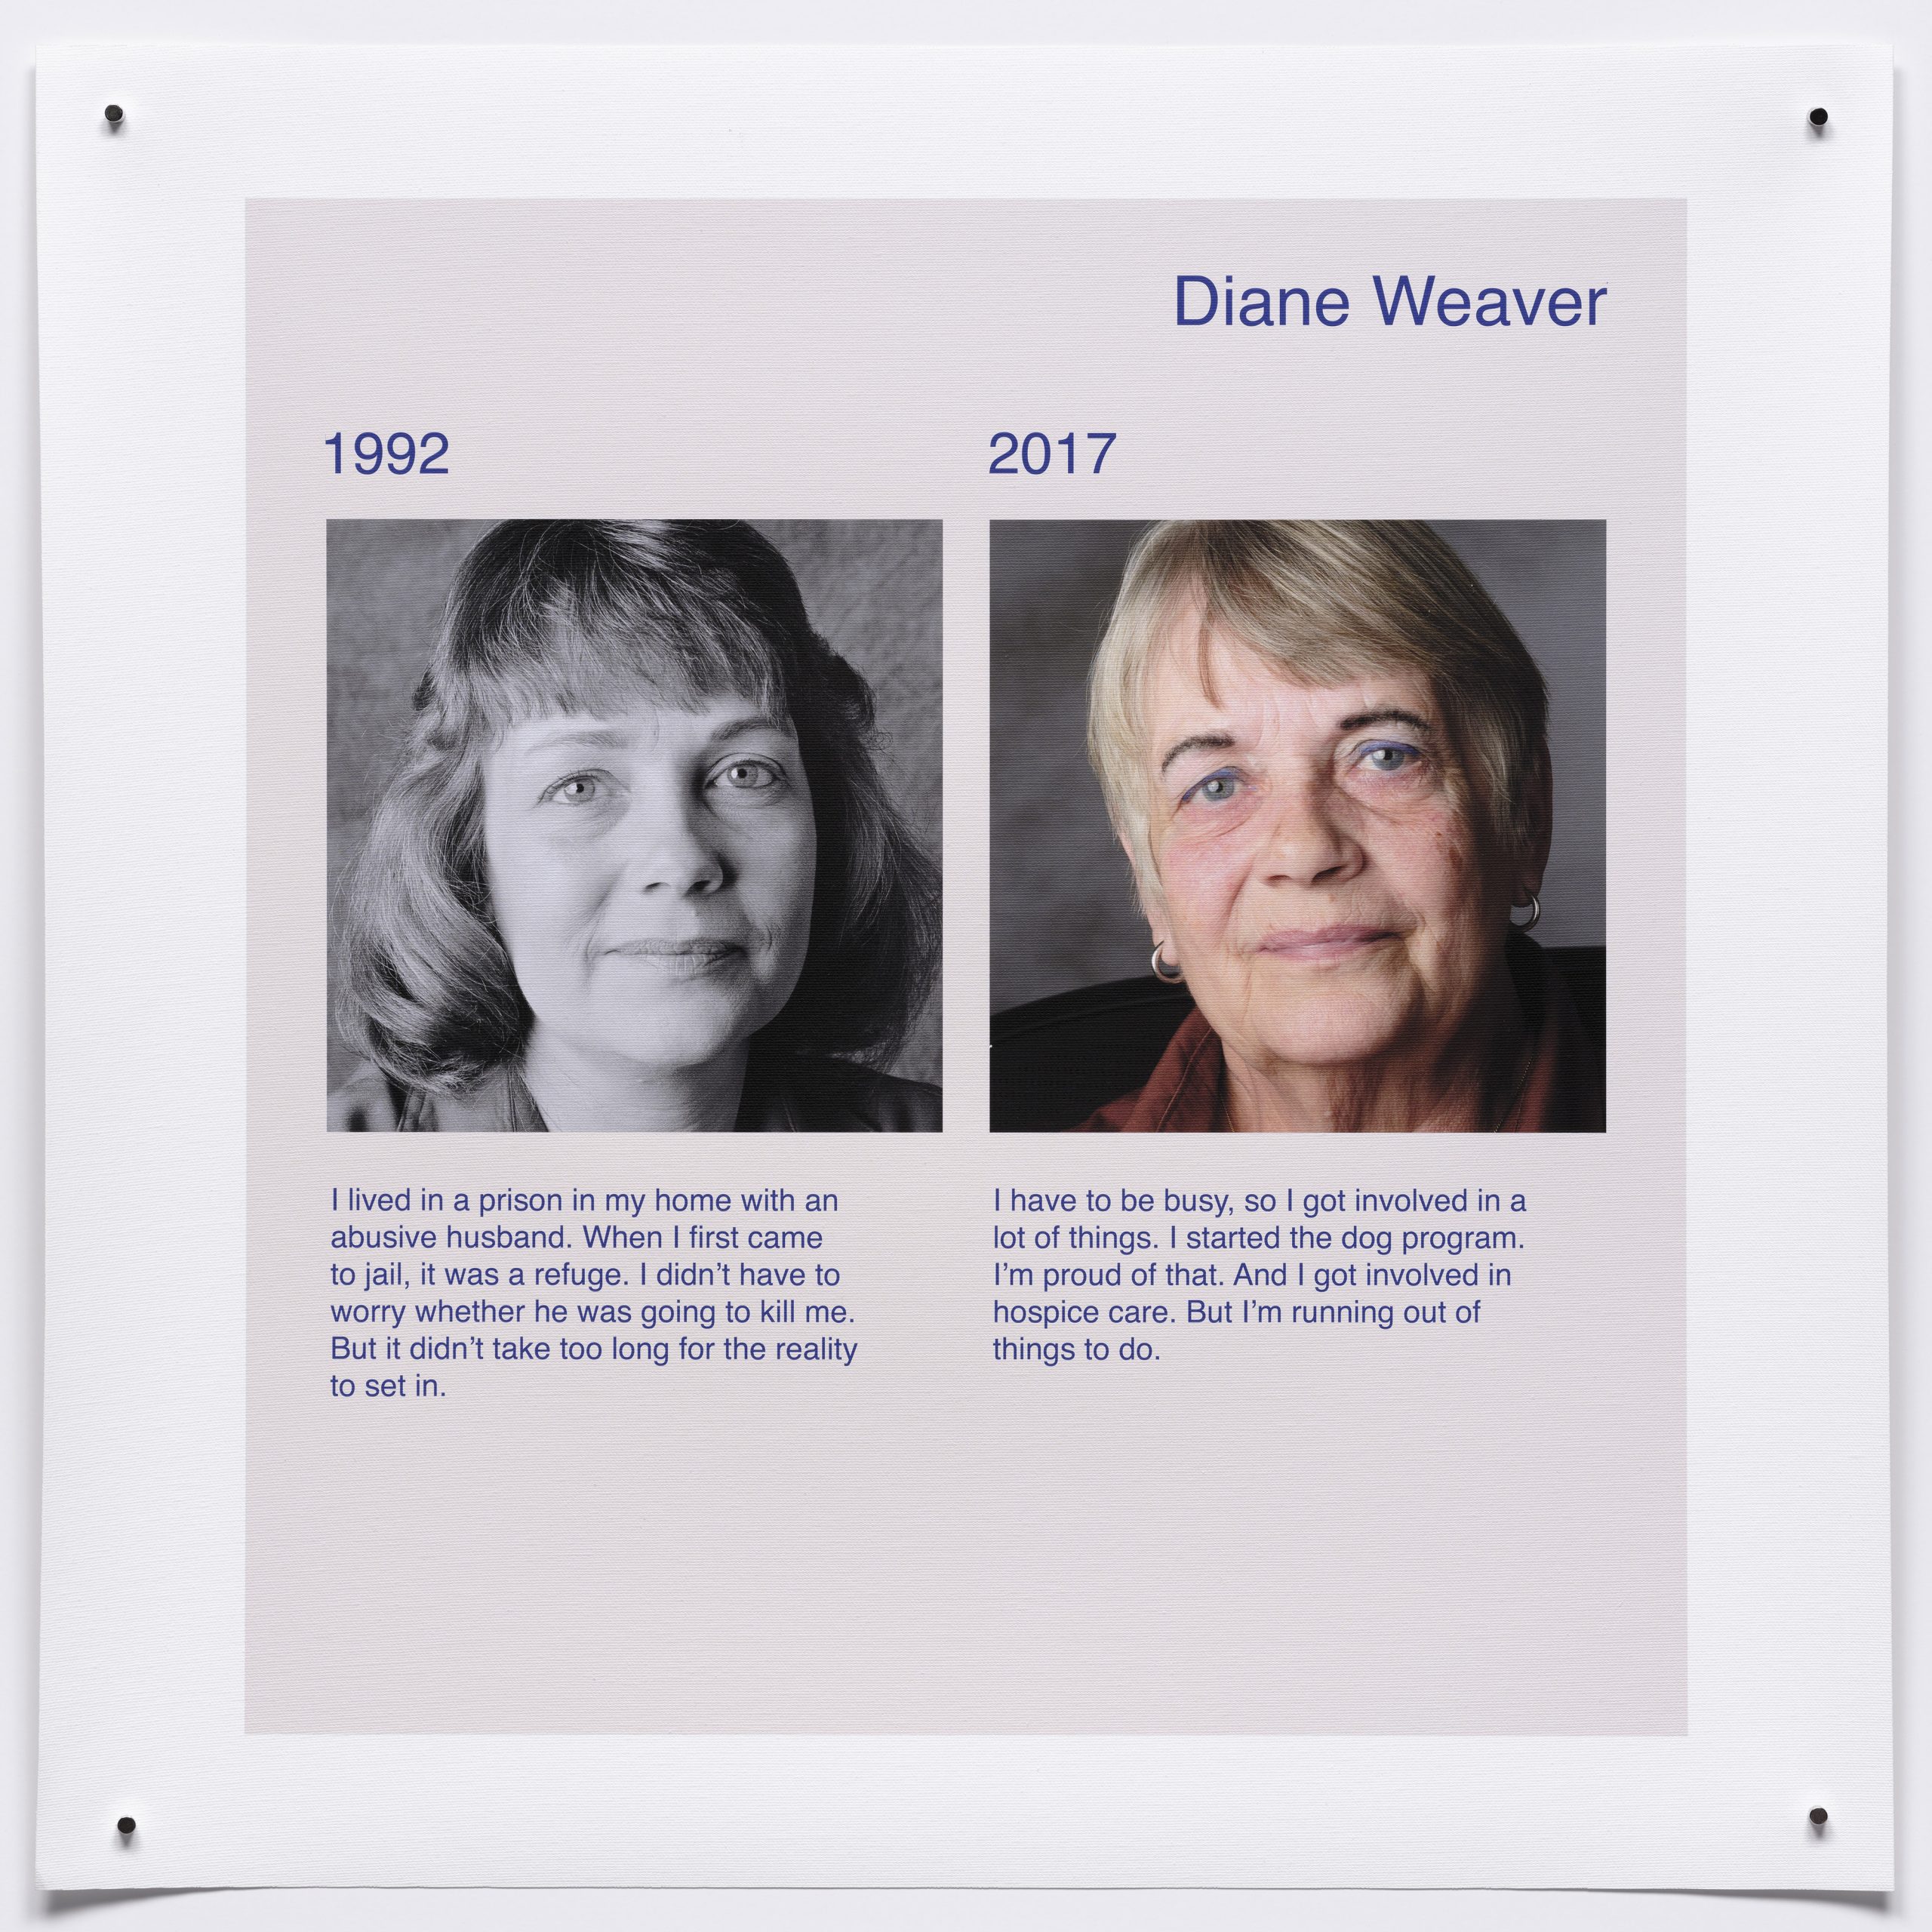 Two photographs side by side of Diane Weaver, taken in 1992 and 2017, one in black and white and the other in color. Weaver is white and in both photos she is smiling and has bangs that frame her face. Text statements appear beneath each photo